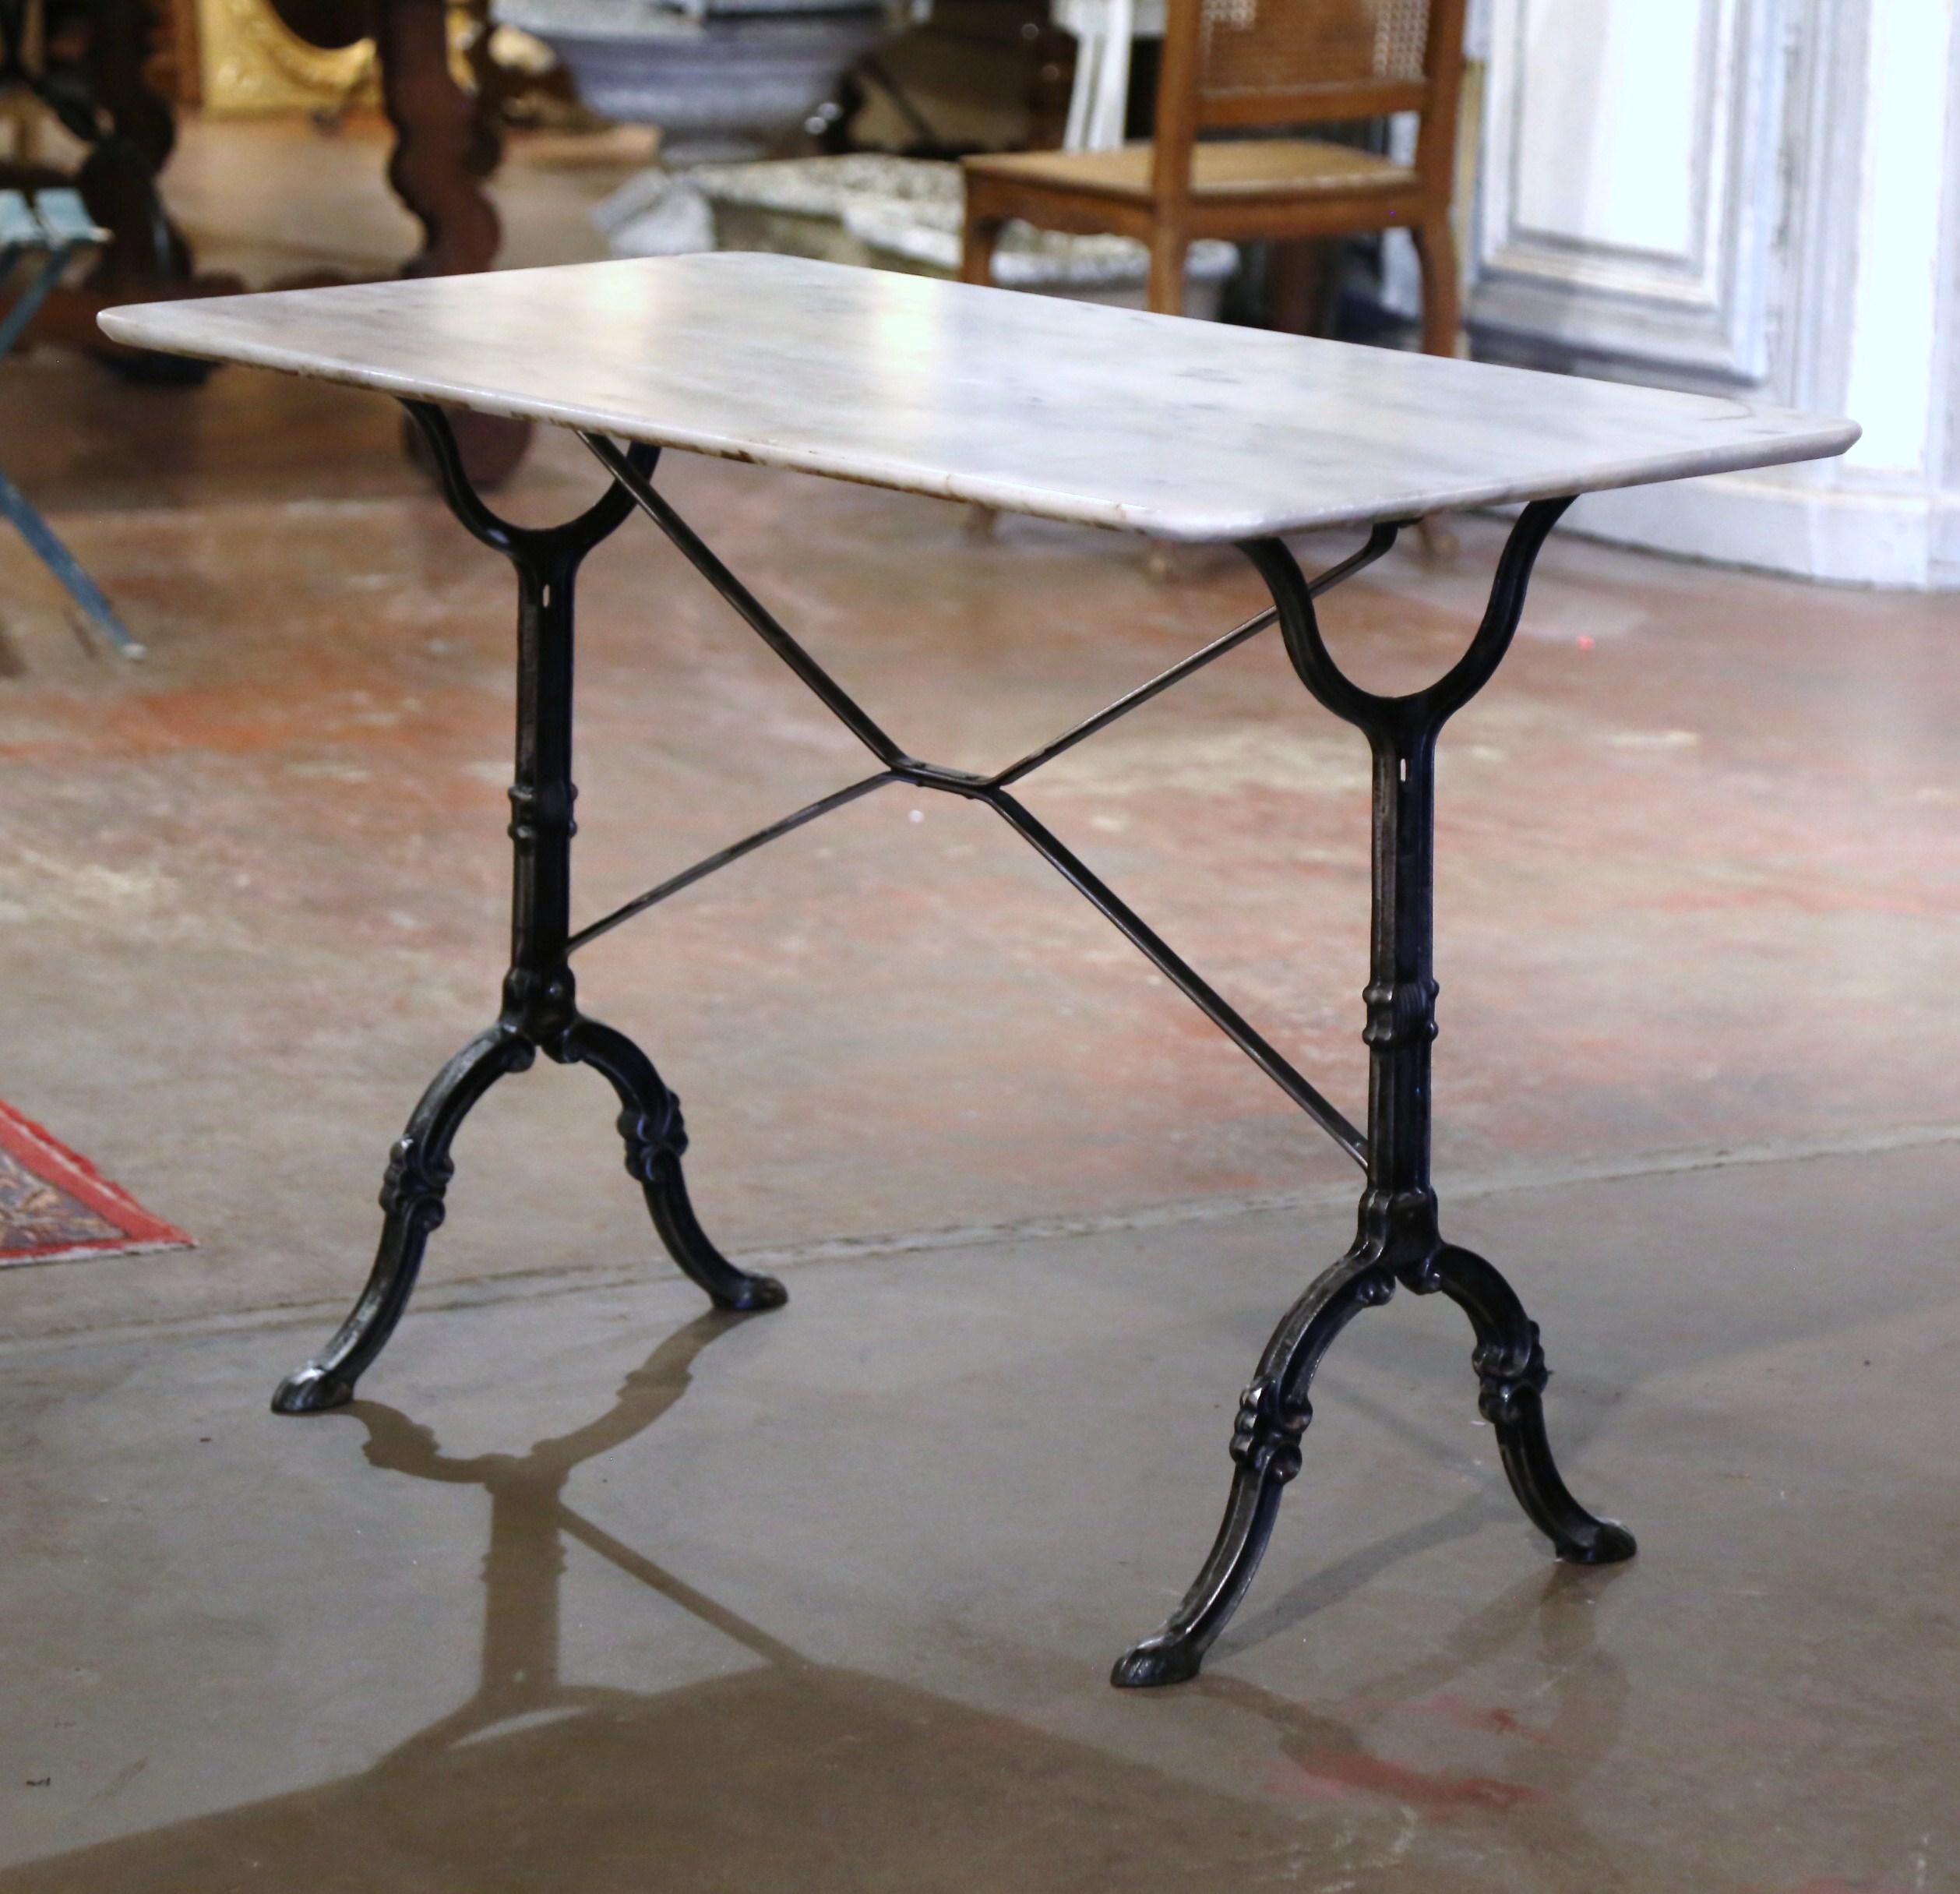 Decorate a patio or covered porch with this elegant antique bistrot table. Crafted in France circa 1950, the cast iron table sits on a trestle base with elegant scroll legs ending with hoof feet, and joined together with a double decorative crossed